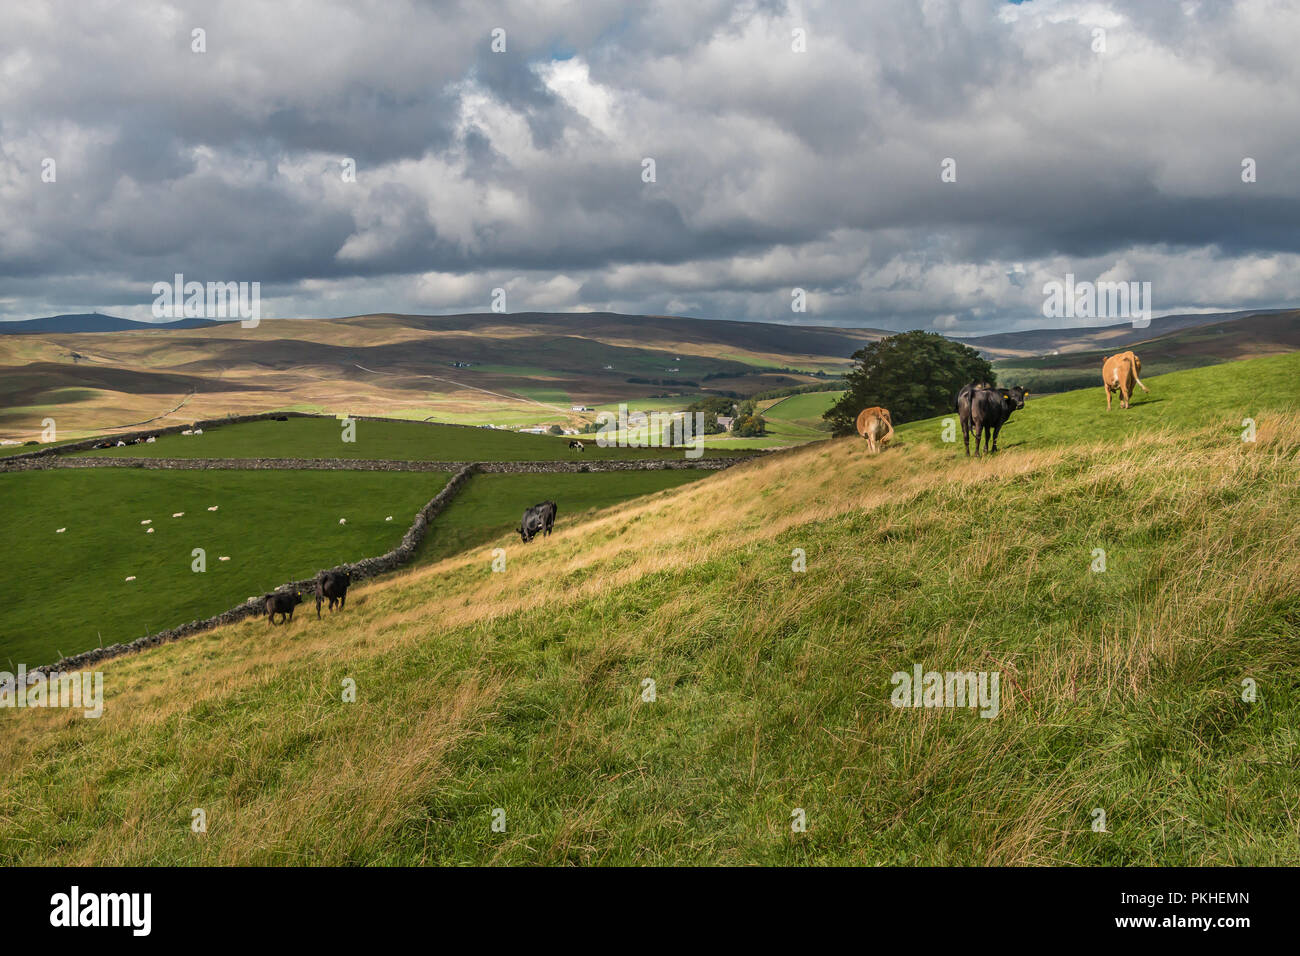 North Pennines AONB Landscape, cattle grazing on the hillside at Hanging Shaw. Upper Teesdale, UK in early autumn sunshine Stock Photo